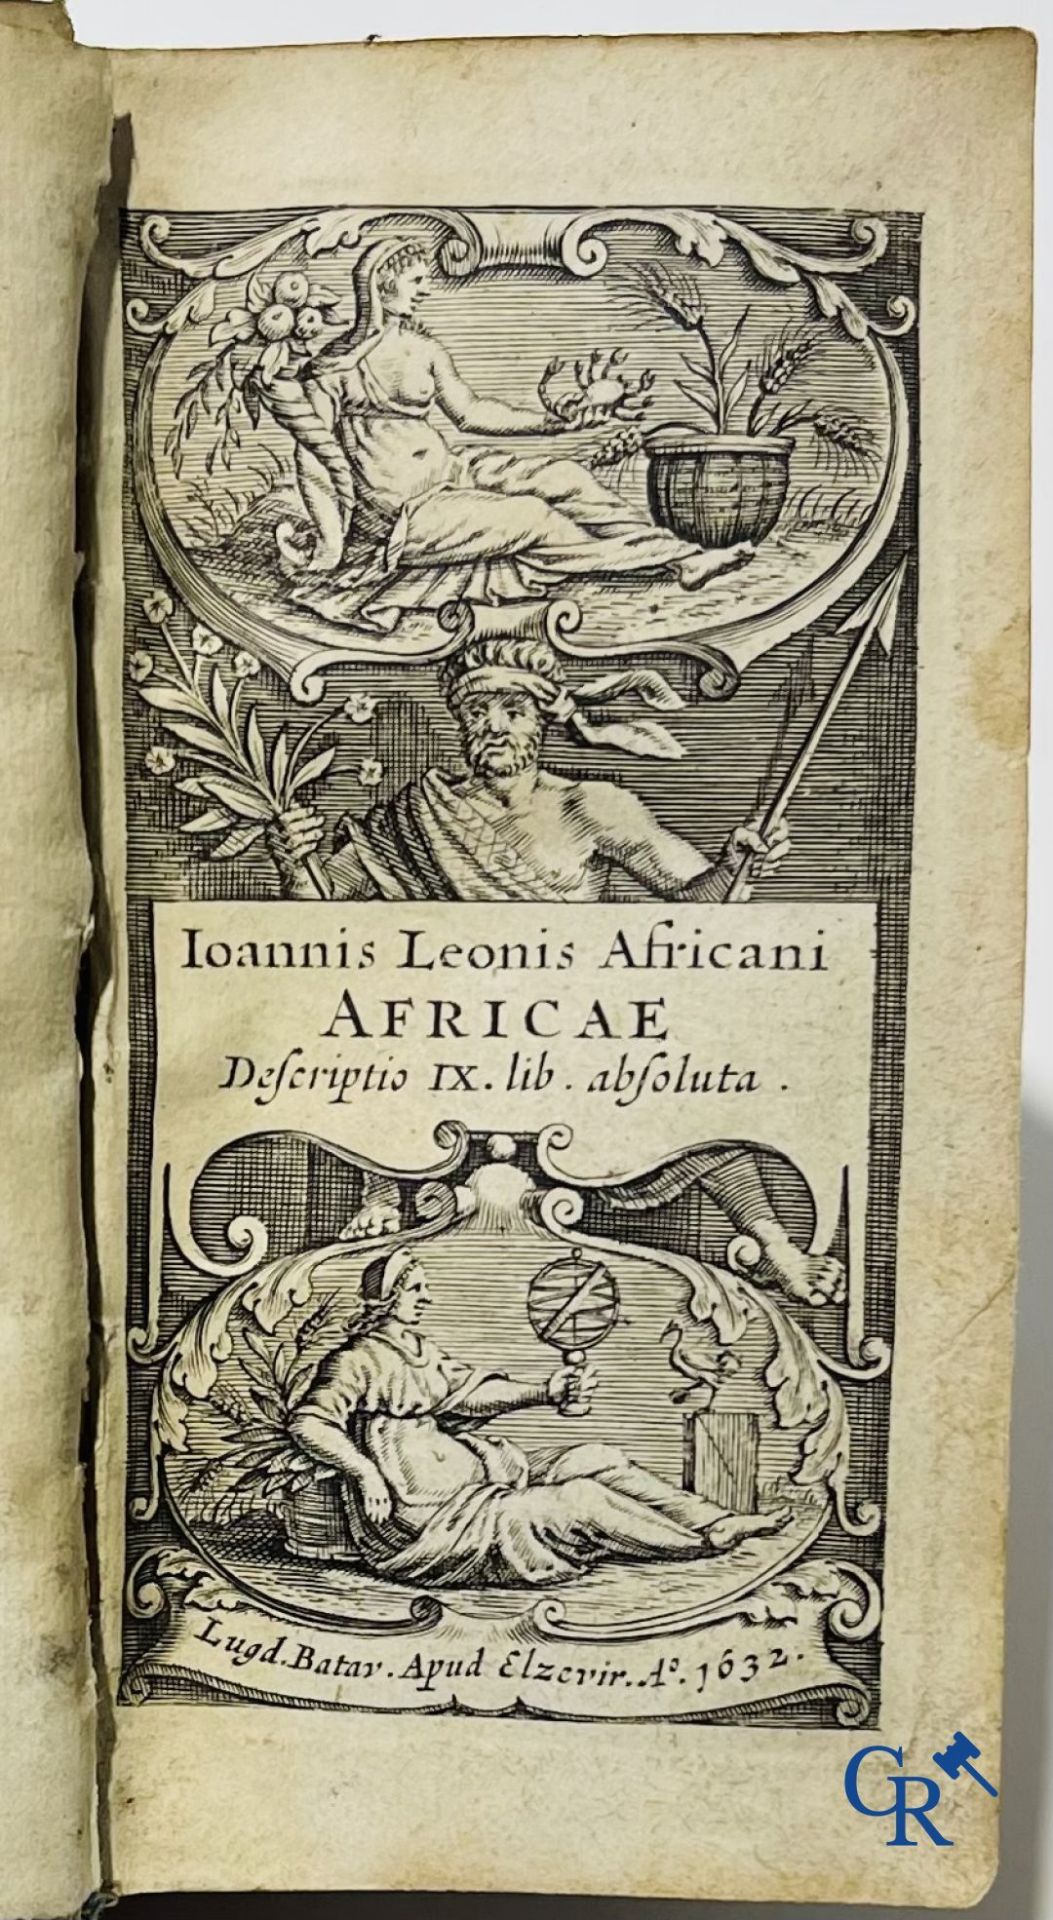 Early printed books: Johannis Leonis Africani. Africae, Elzevier 1632. - Image 2 of 8